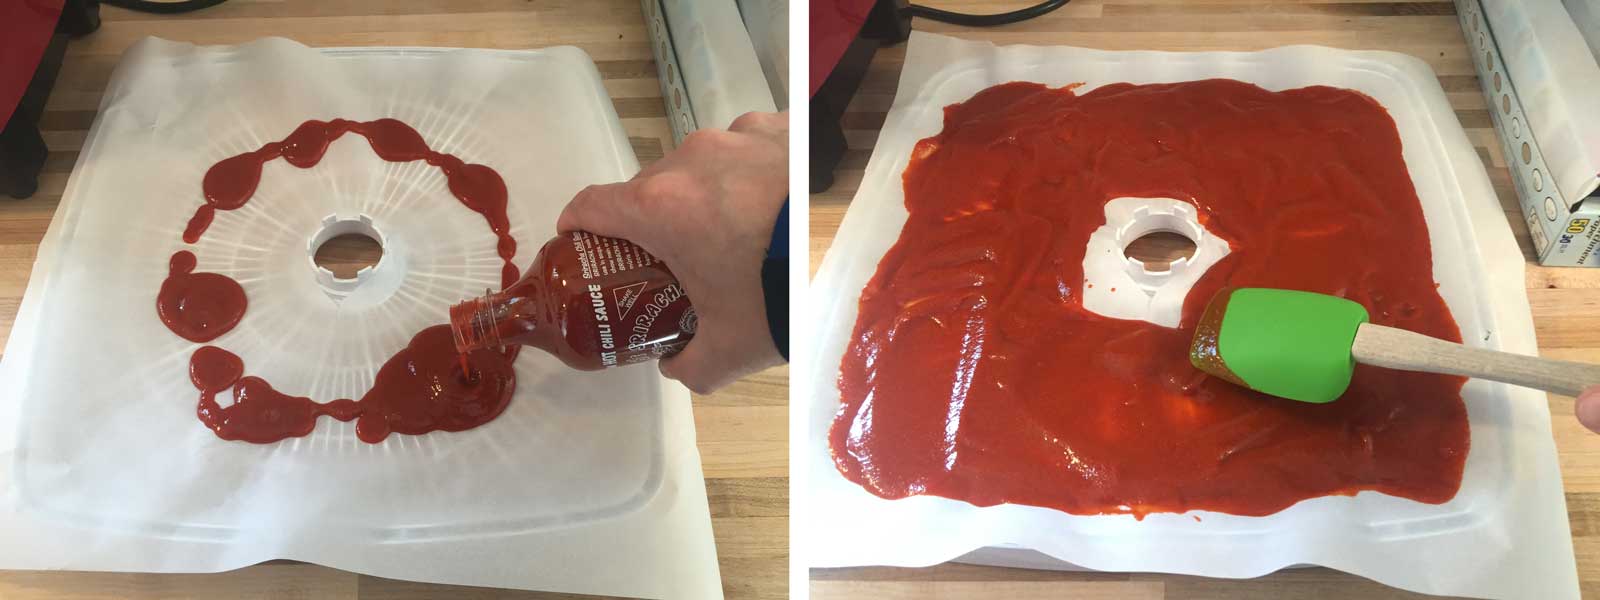 Dehydrating a bottle of Sriracha for backpacking